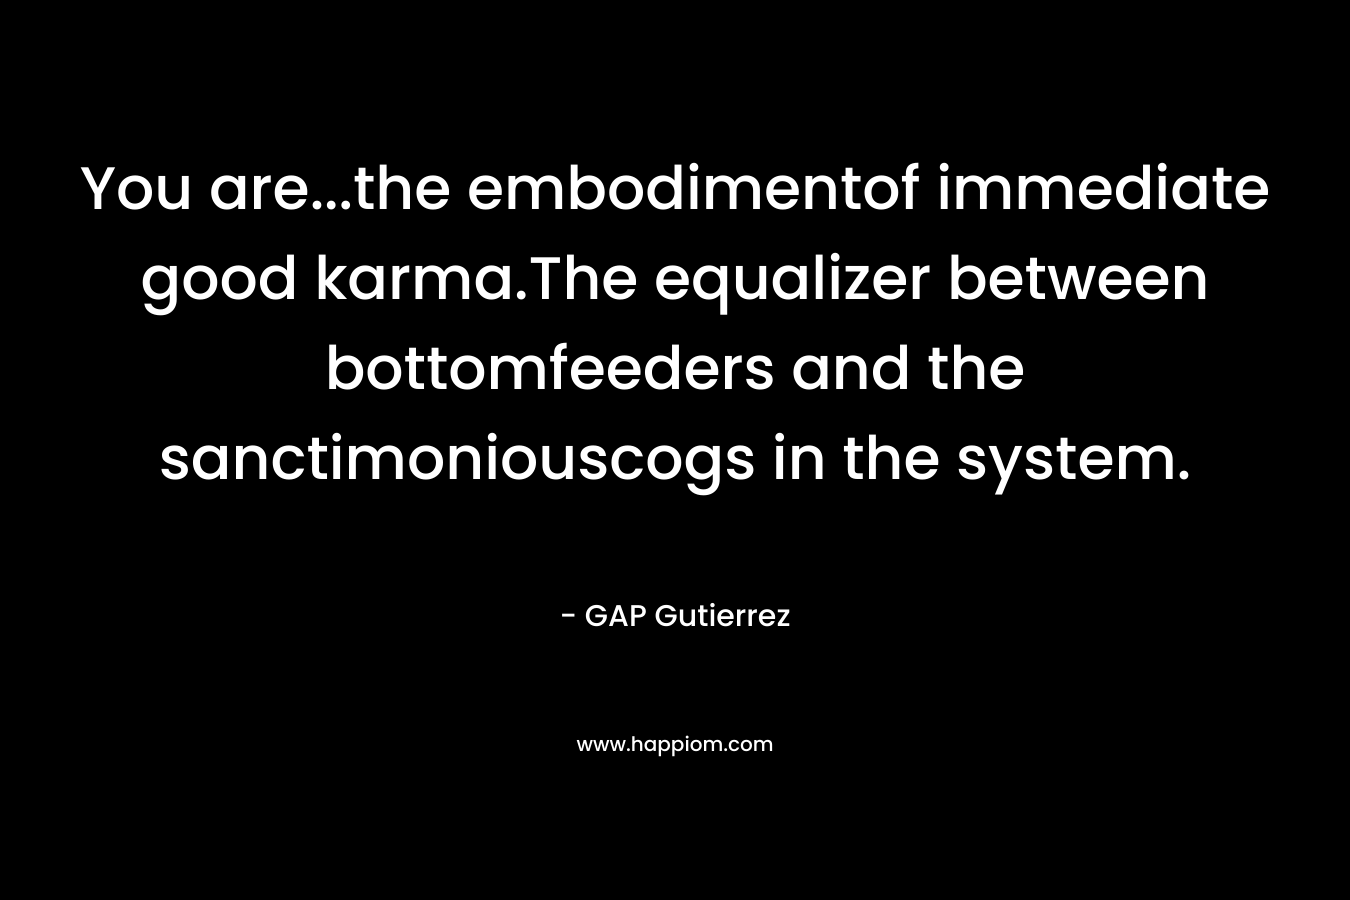 You are...the embodimentof immediate good karma.The equalizer between bottomfeeders and the sanctimoniouscogs in the system.